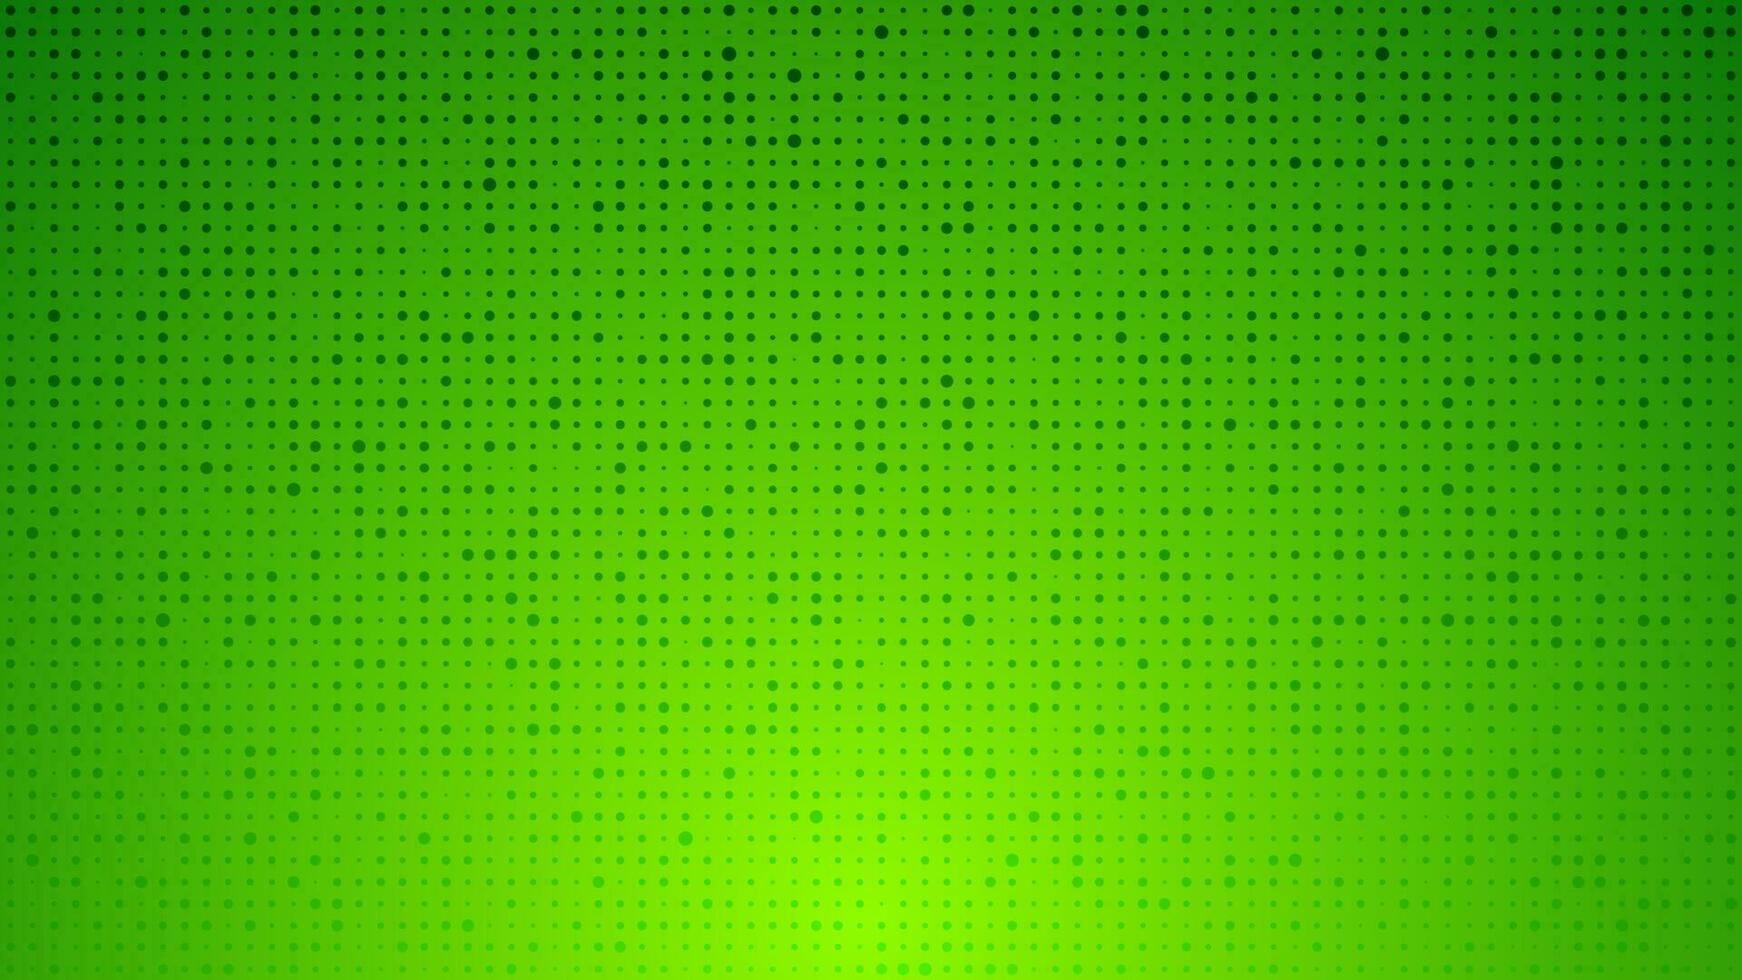 Abstract geometric gradient circles background. Green dot background with empty space. Vector illustration.